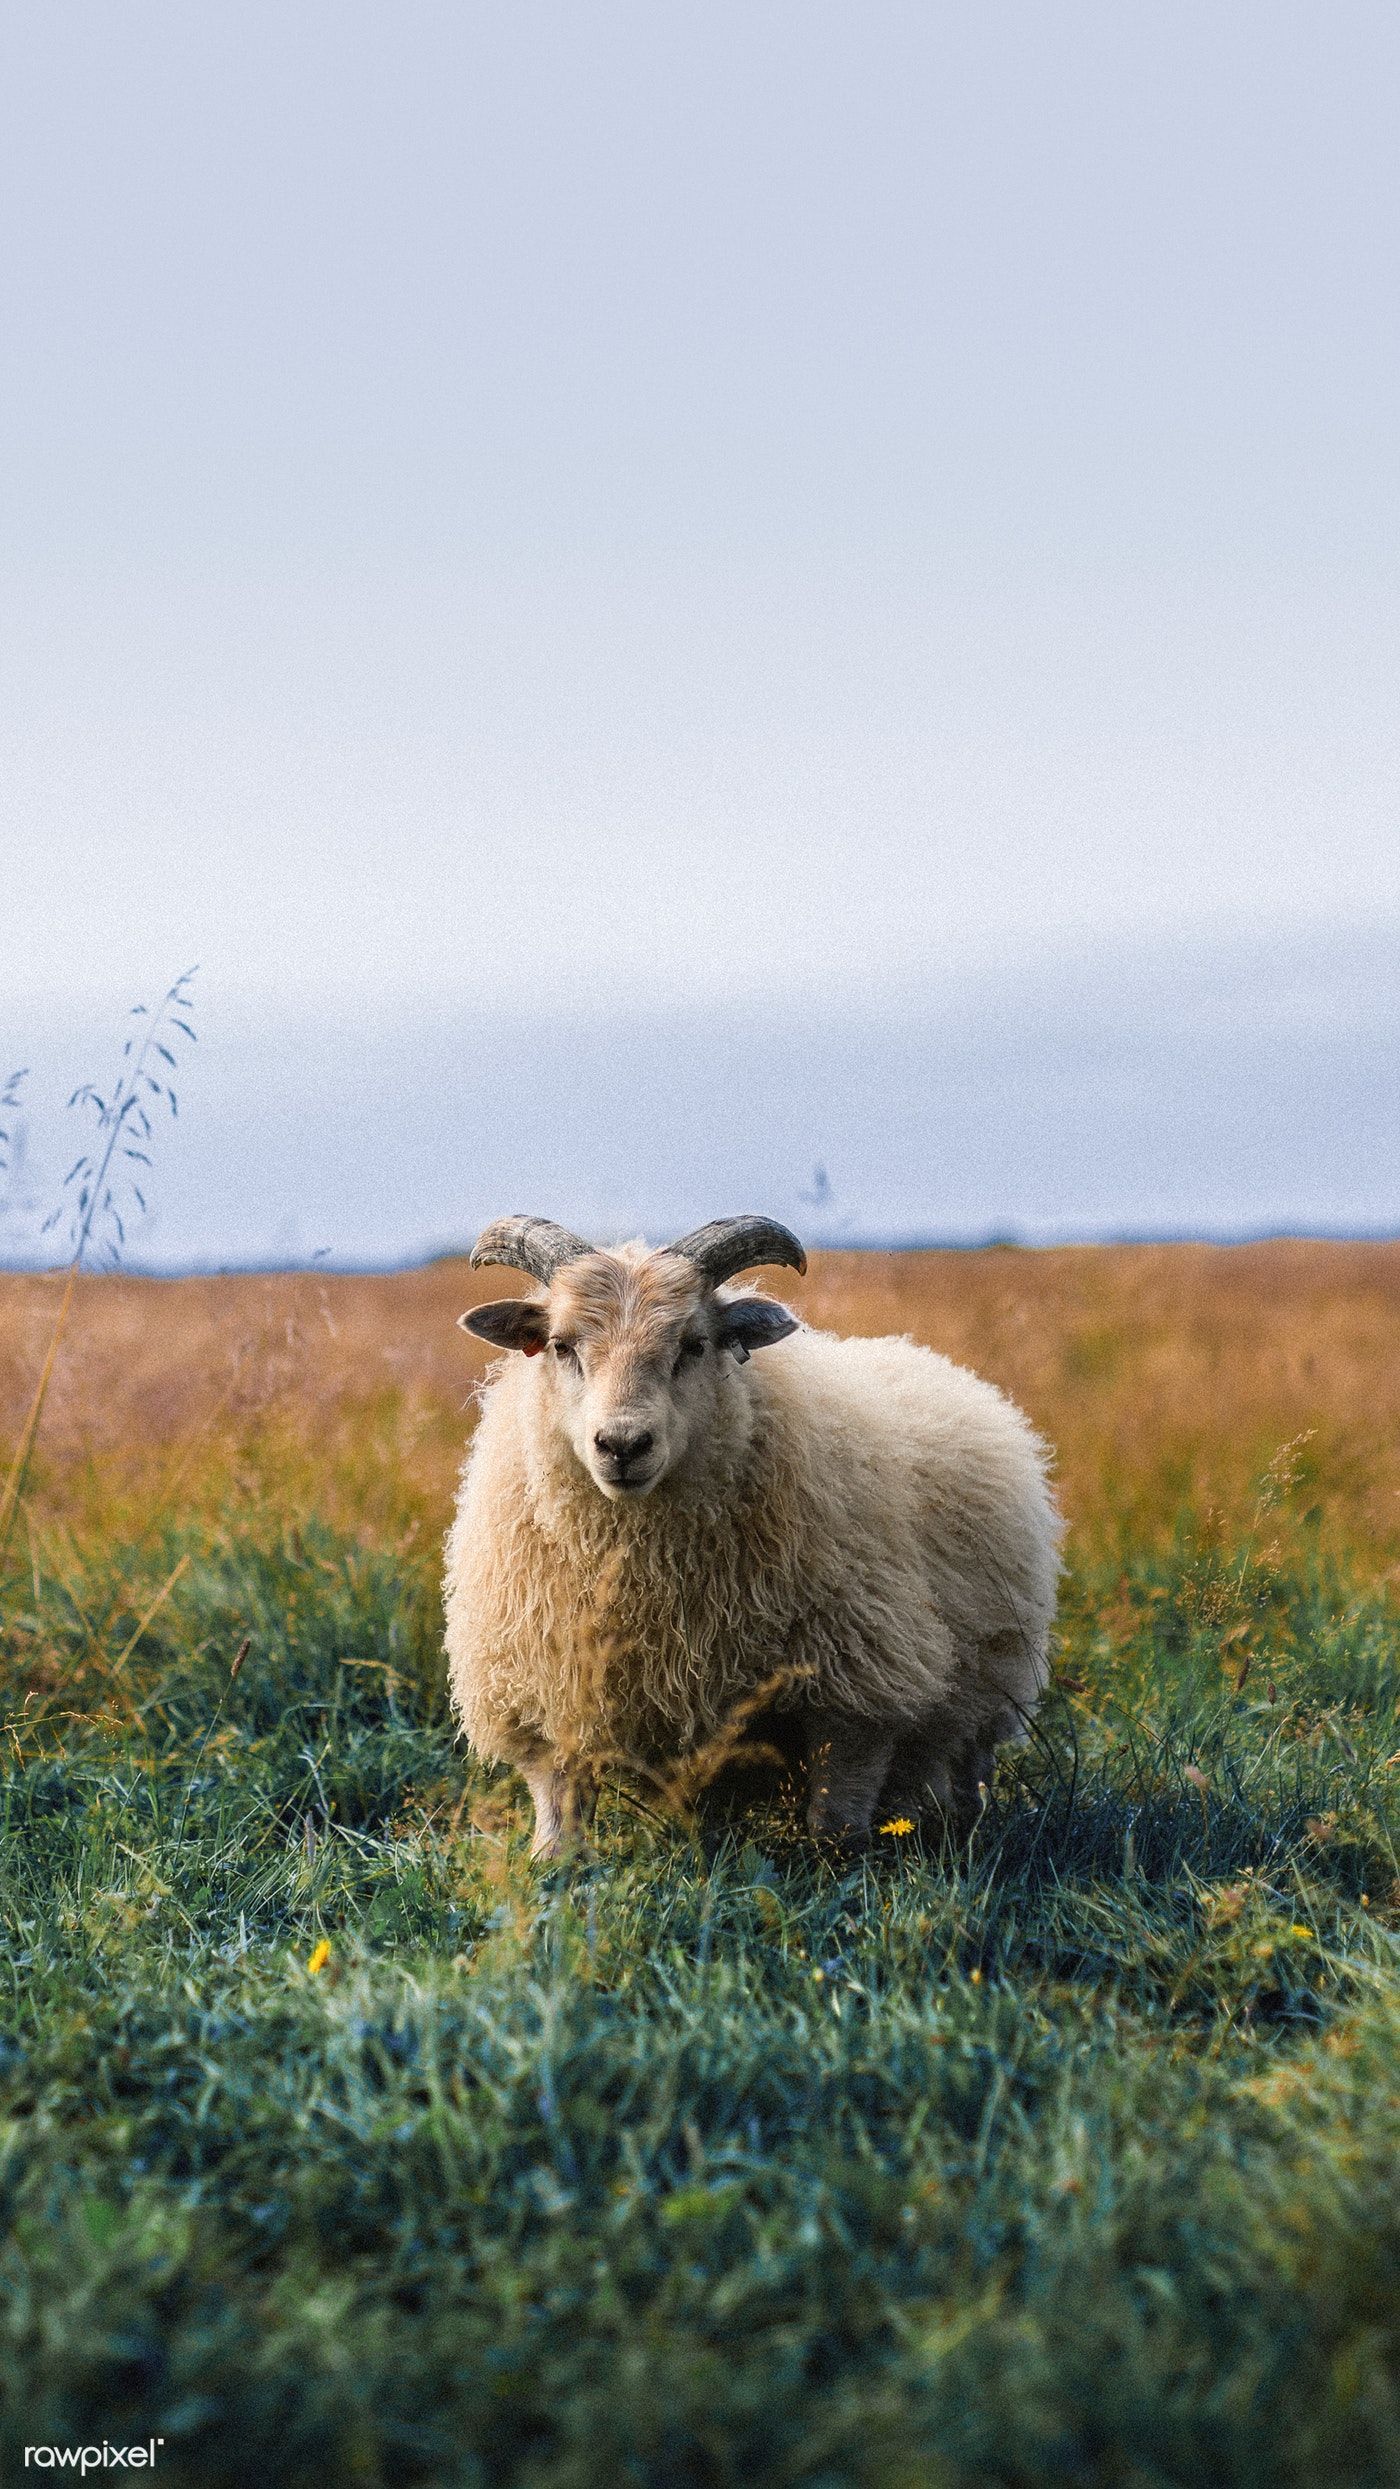 Download premium image of Scottish sheep standing alone on a field mobile. Field wallpaper, Sheep, Couple wallpaper